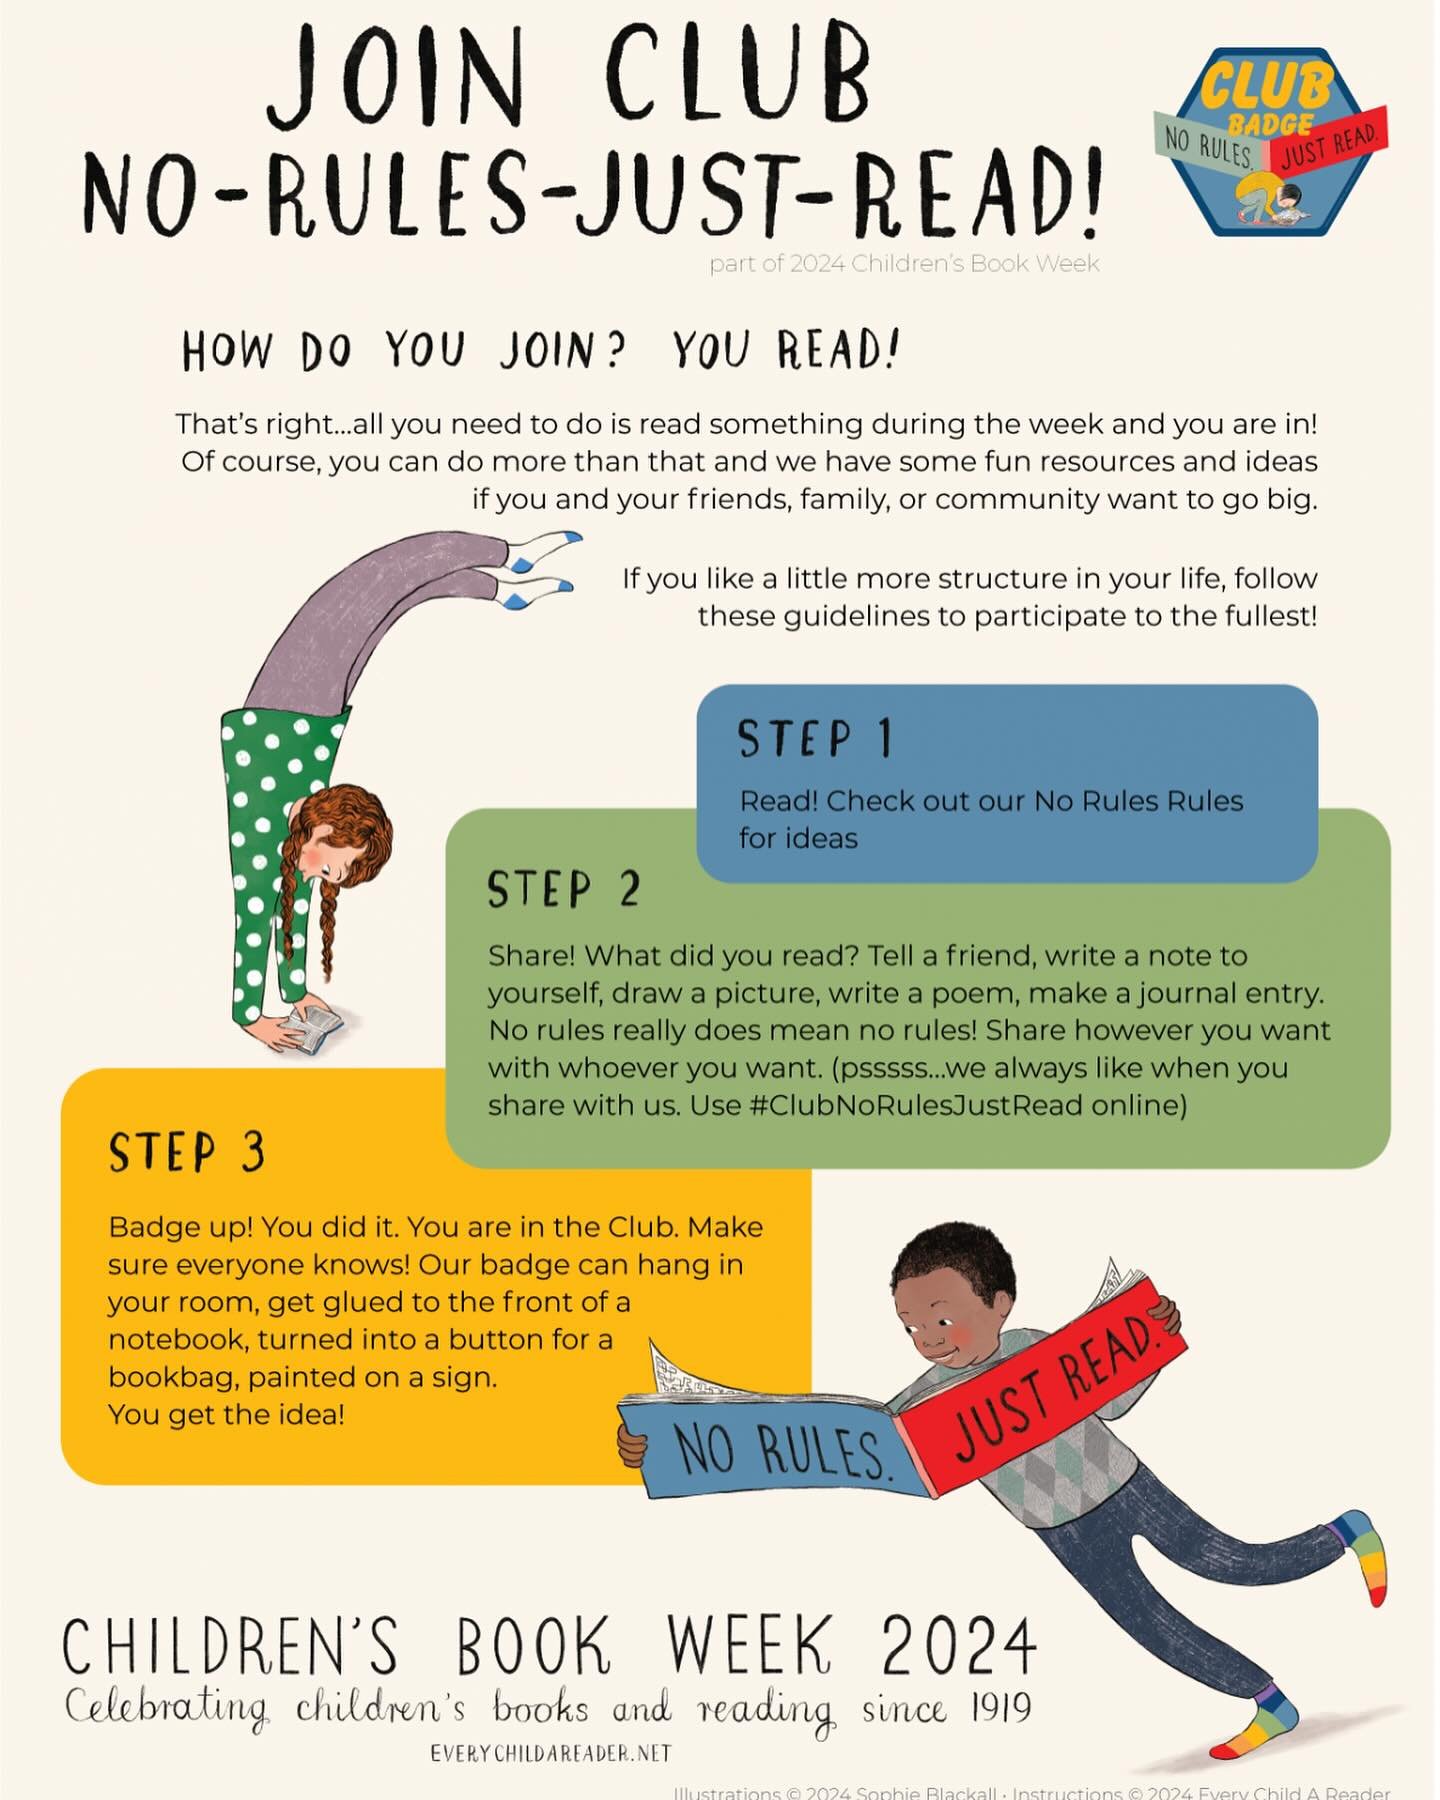 It&rsquo;s CHILDREN&rsquo;S BOOK WEEK 2024!! 📚

You and your little ones (big ones too!) can join the CLUB NO-RULES-JUST-READ simply by reading a book this week! 💯

Read aloud.
Read alone.
Read with friends.
Read in your room.
Read outside.
Read in